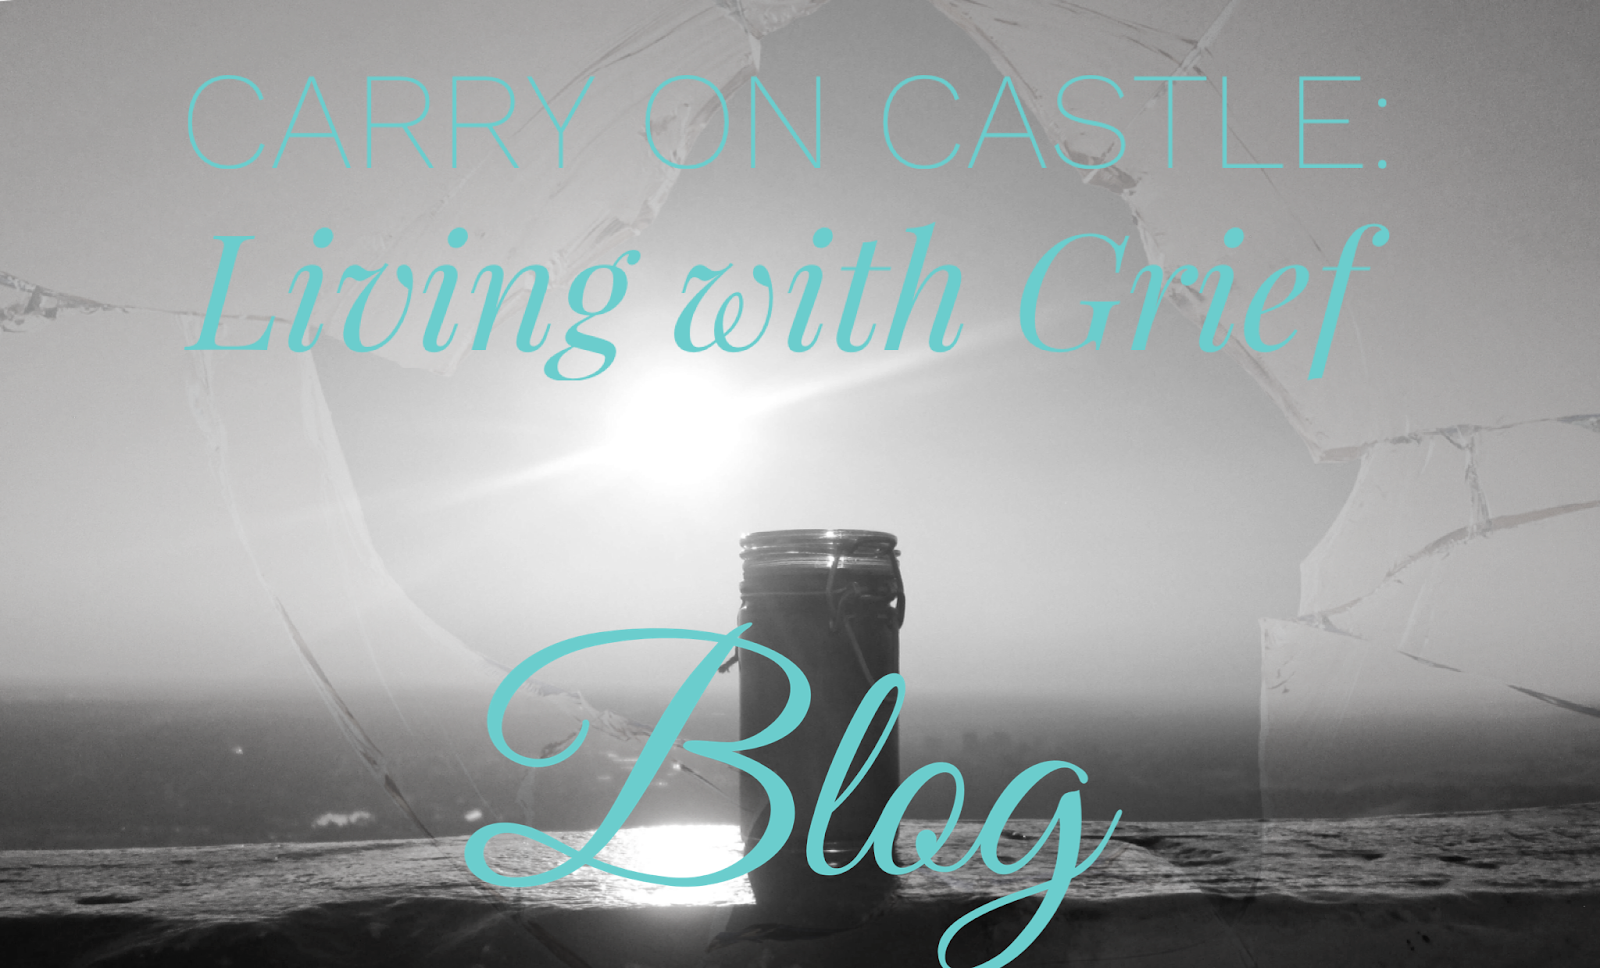 Carry on Castle: Living with Grief